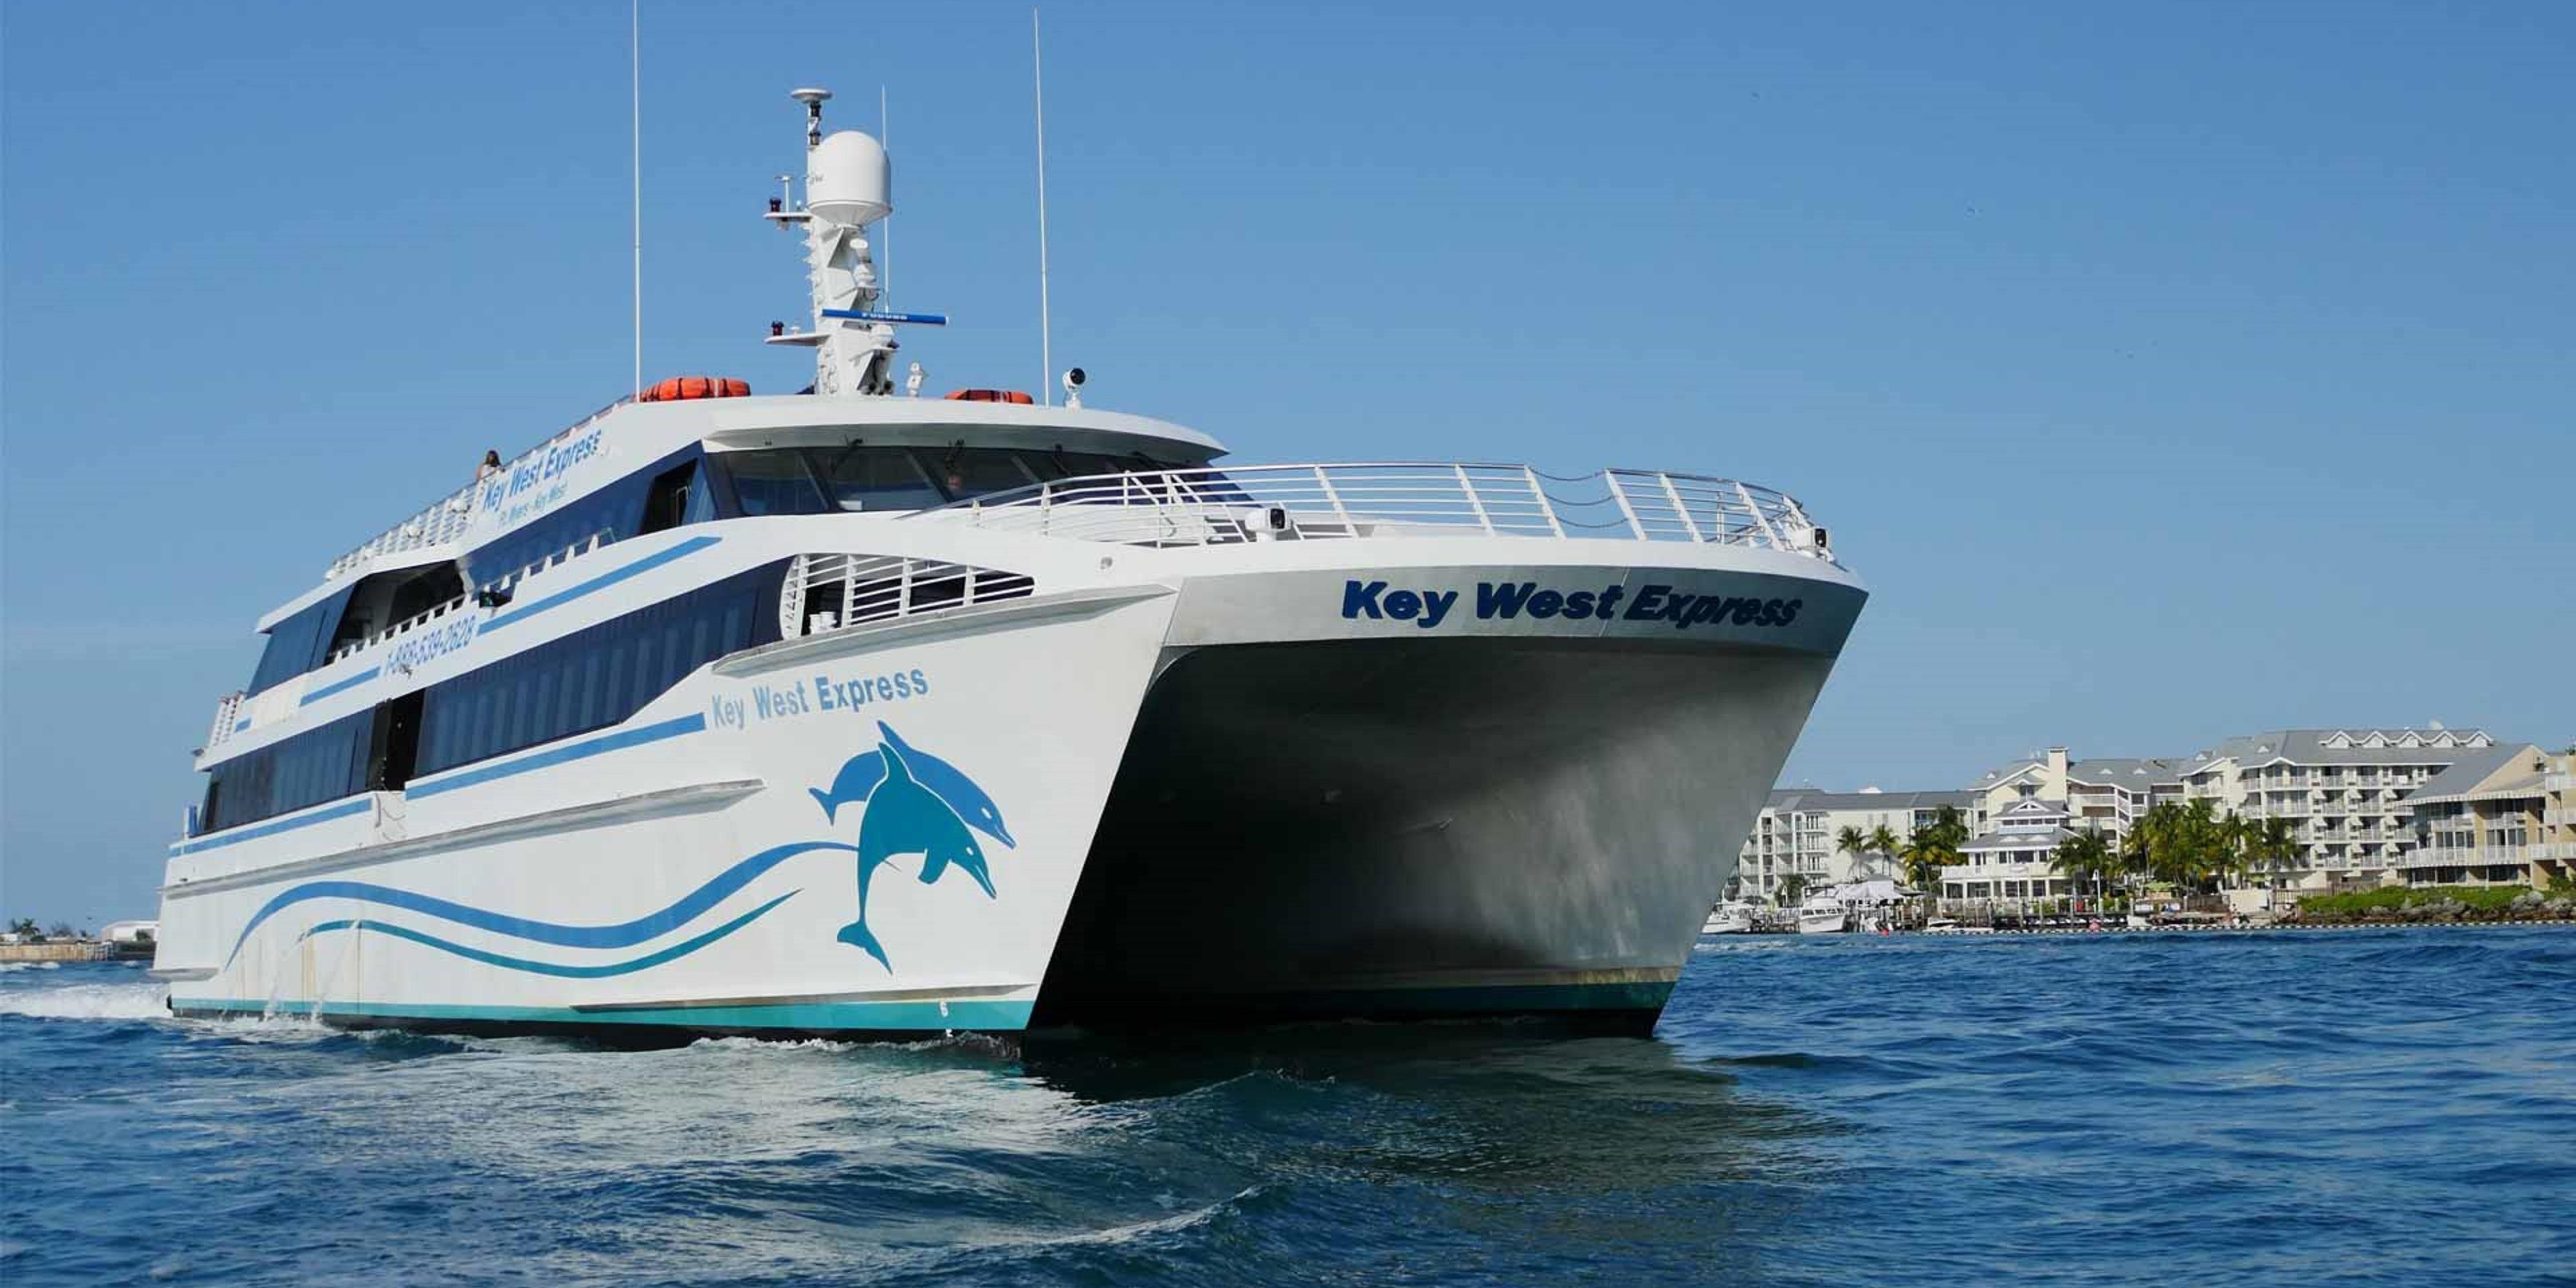 Taking a trip from Fort Myers Beach to Key West? We are just a 5-minute drive from the Key West Express dock. And we have a special KWE rate!